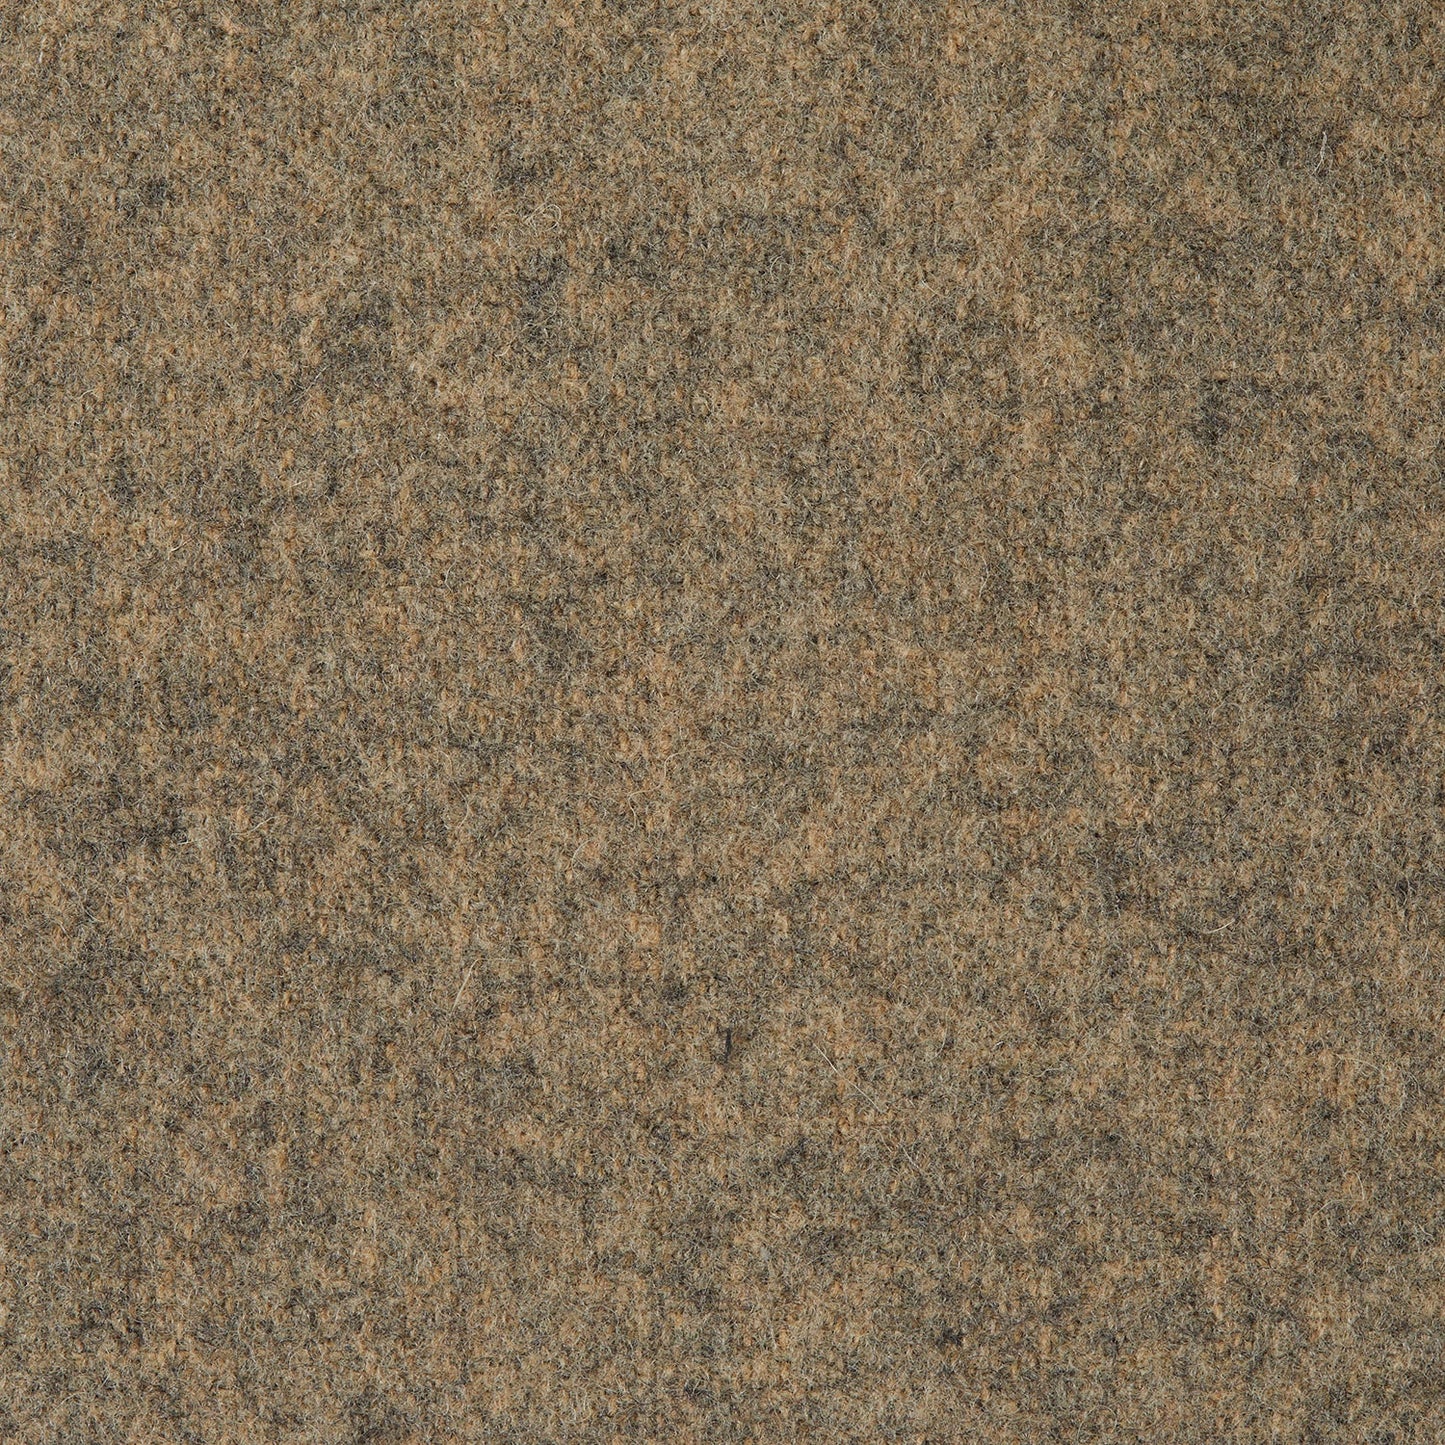 Dyyk stofstaal New Wool stone